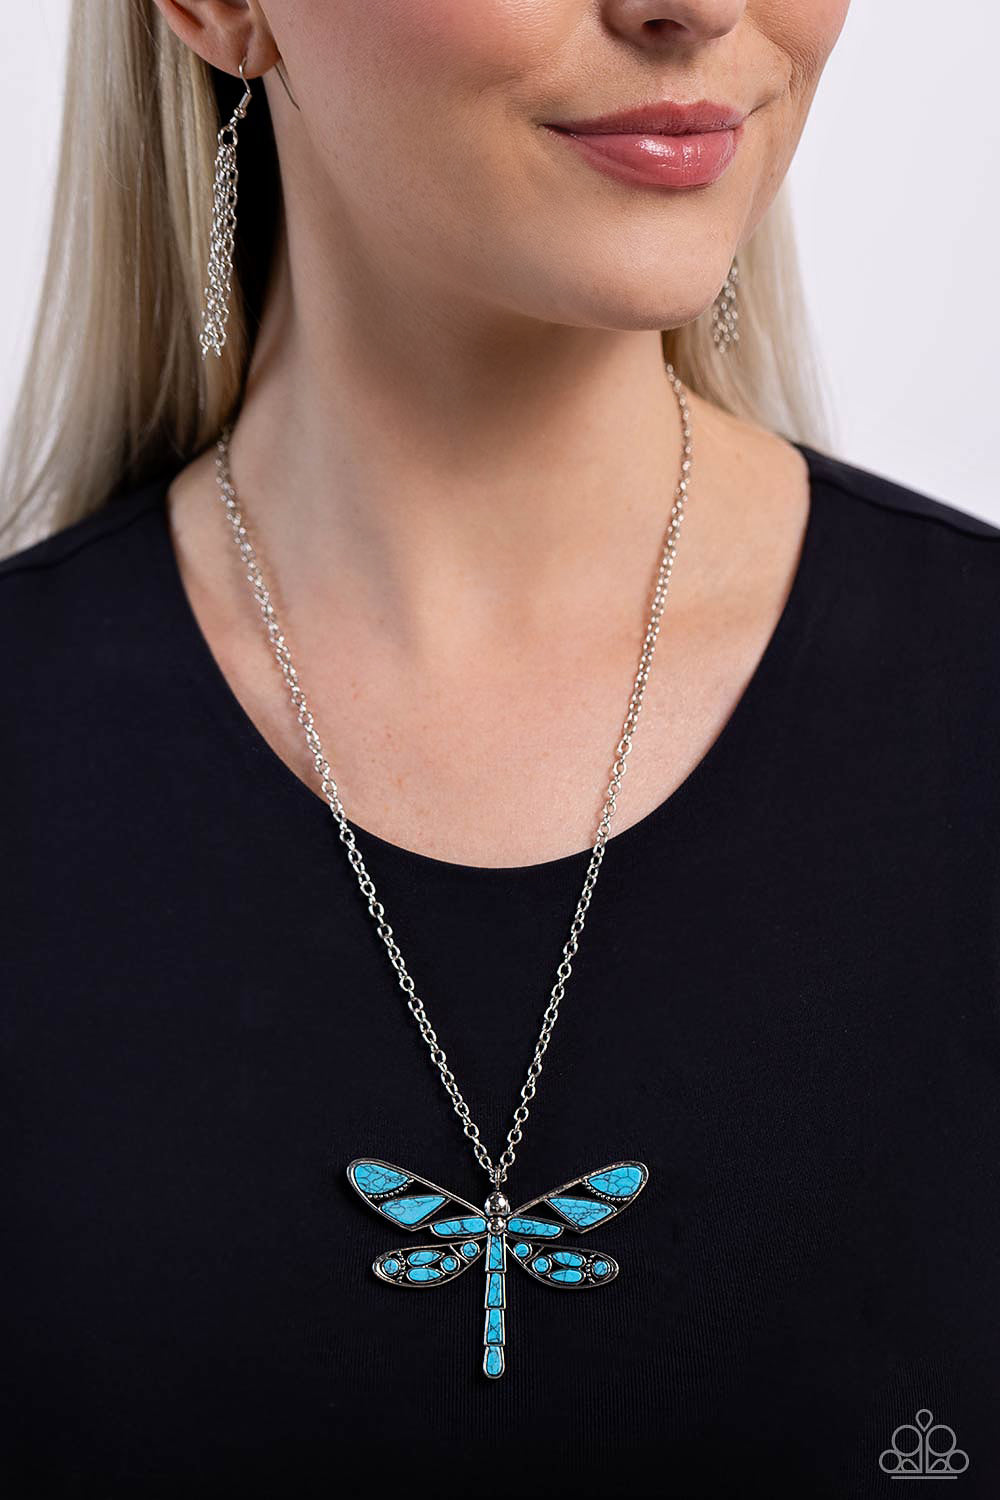 FLYING Low Turquoise Dragonfly Necklace - Paparazzi Accessories  Featuring a classic silver chain, various cuts of turquoise stone are passed into an oversized, airy silver dragonfly pendant for a rustically earthy centerpiece. Features an adjustable clasp closure. As the stone elements in this piece are natural, some color variation is normal.  Sold as one individual necklace. Includes one pair of matching earrings.  Sku:  P2SE-BLXX-548XX